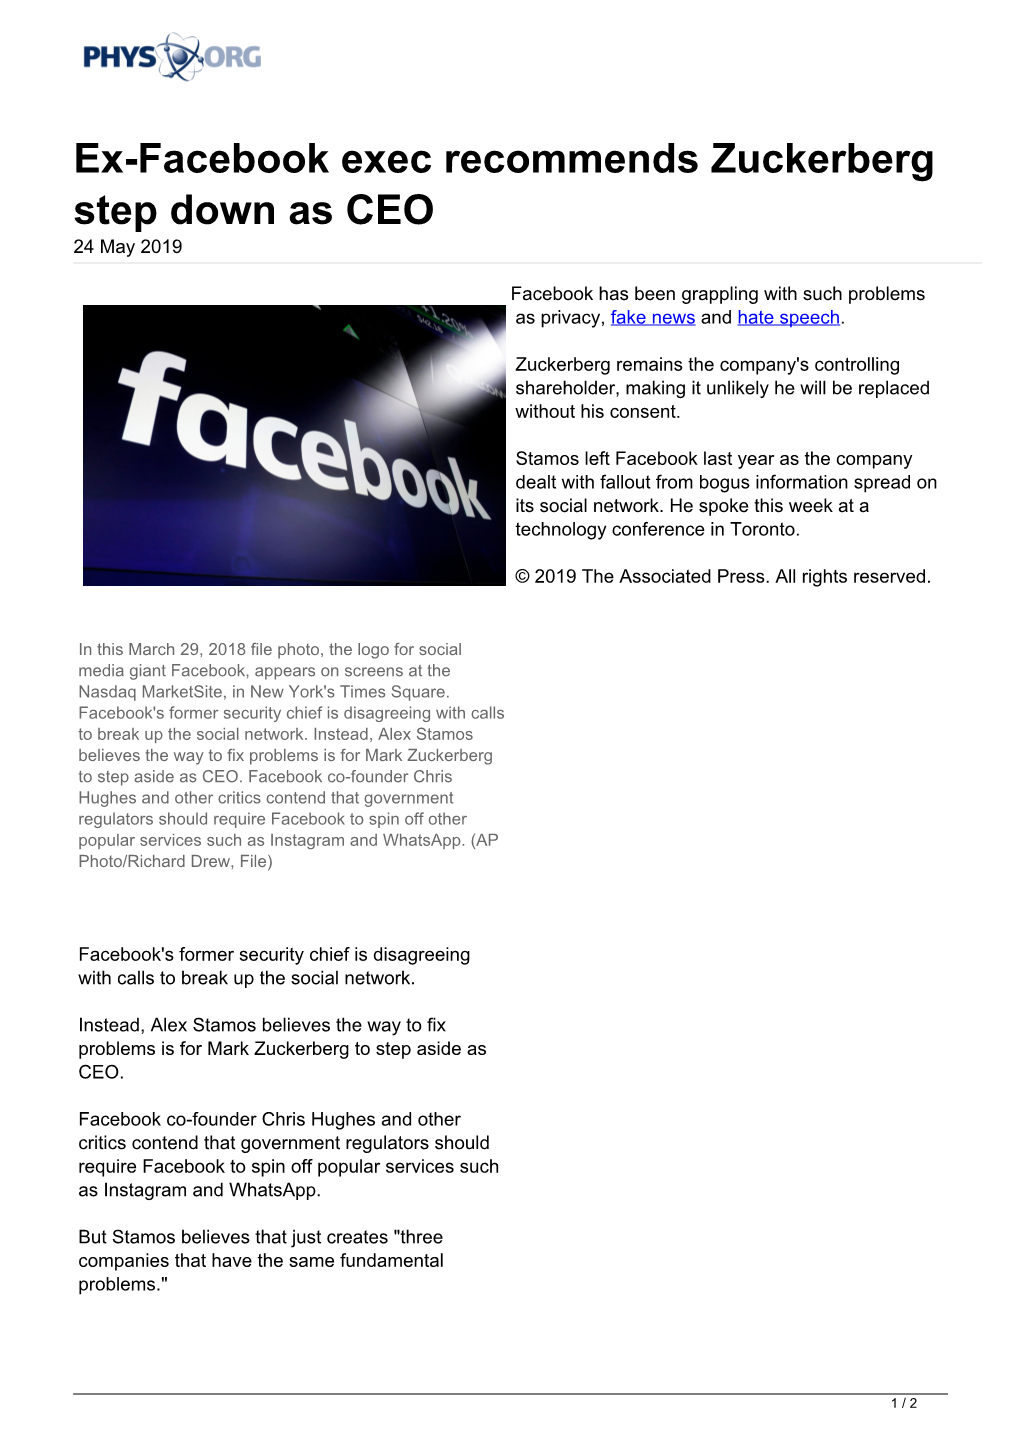 Ex-Facebook Exec Recommends Zuckerberg Step Down As CEO 24 May 2019